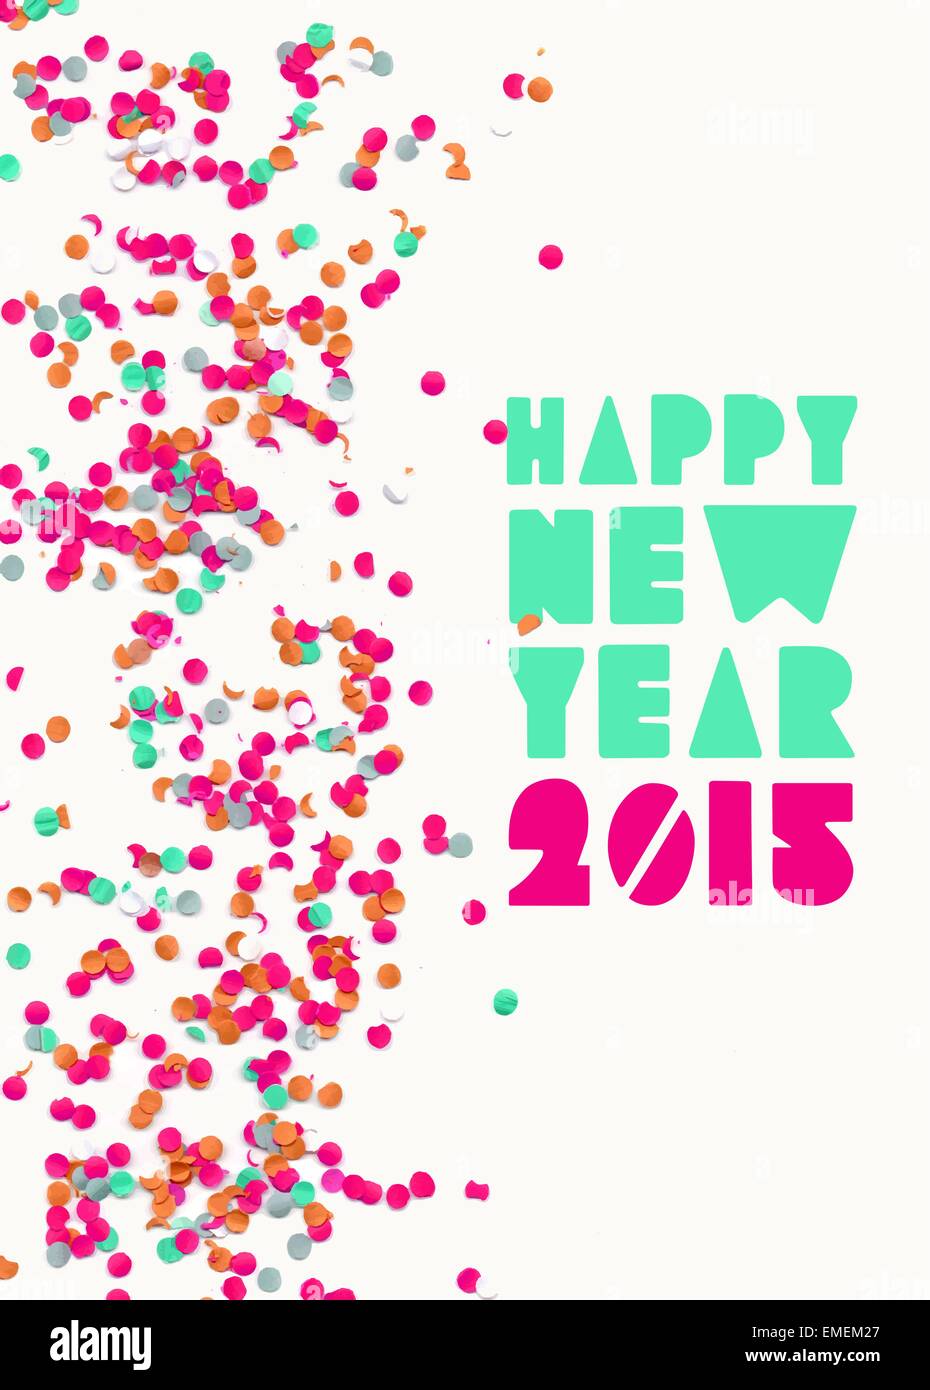 Happy new year 2015 greeting card Stock Vector